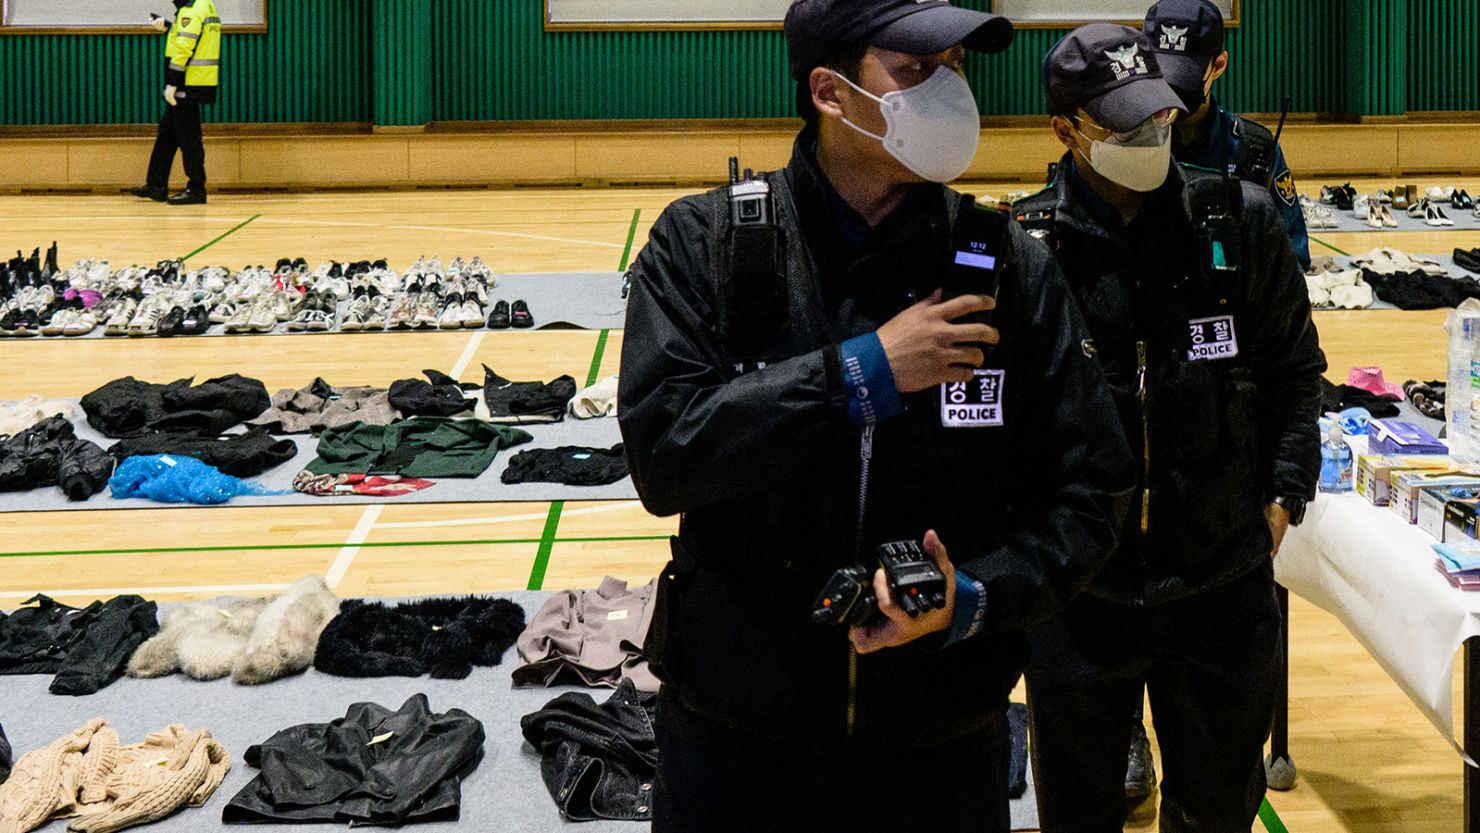 Police walk amongst personal belongings retrieved from the scene of a fatal Halloween crowd surge that killed more than 150 people in the Itaewon district after they were displayed at a gymnasium for relatives of victims to collect, in Seoul on November 1, 2022.